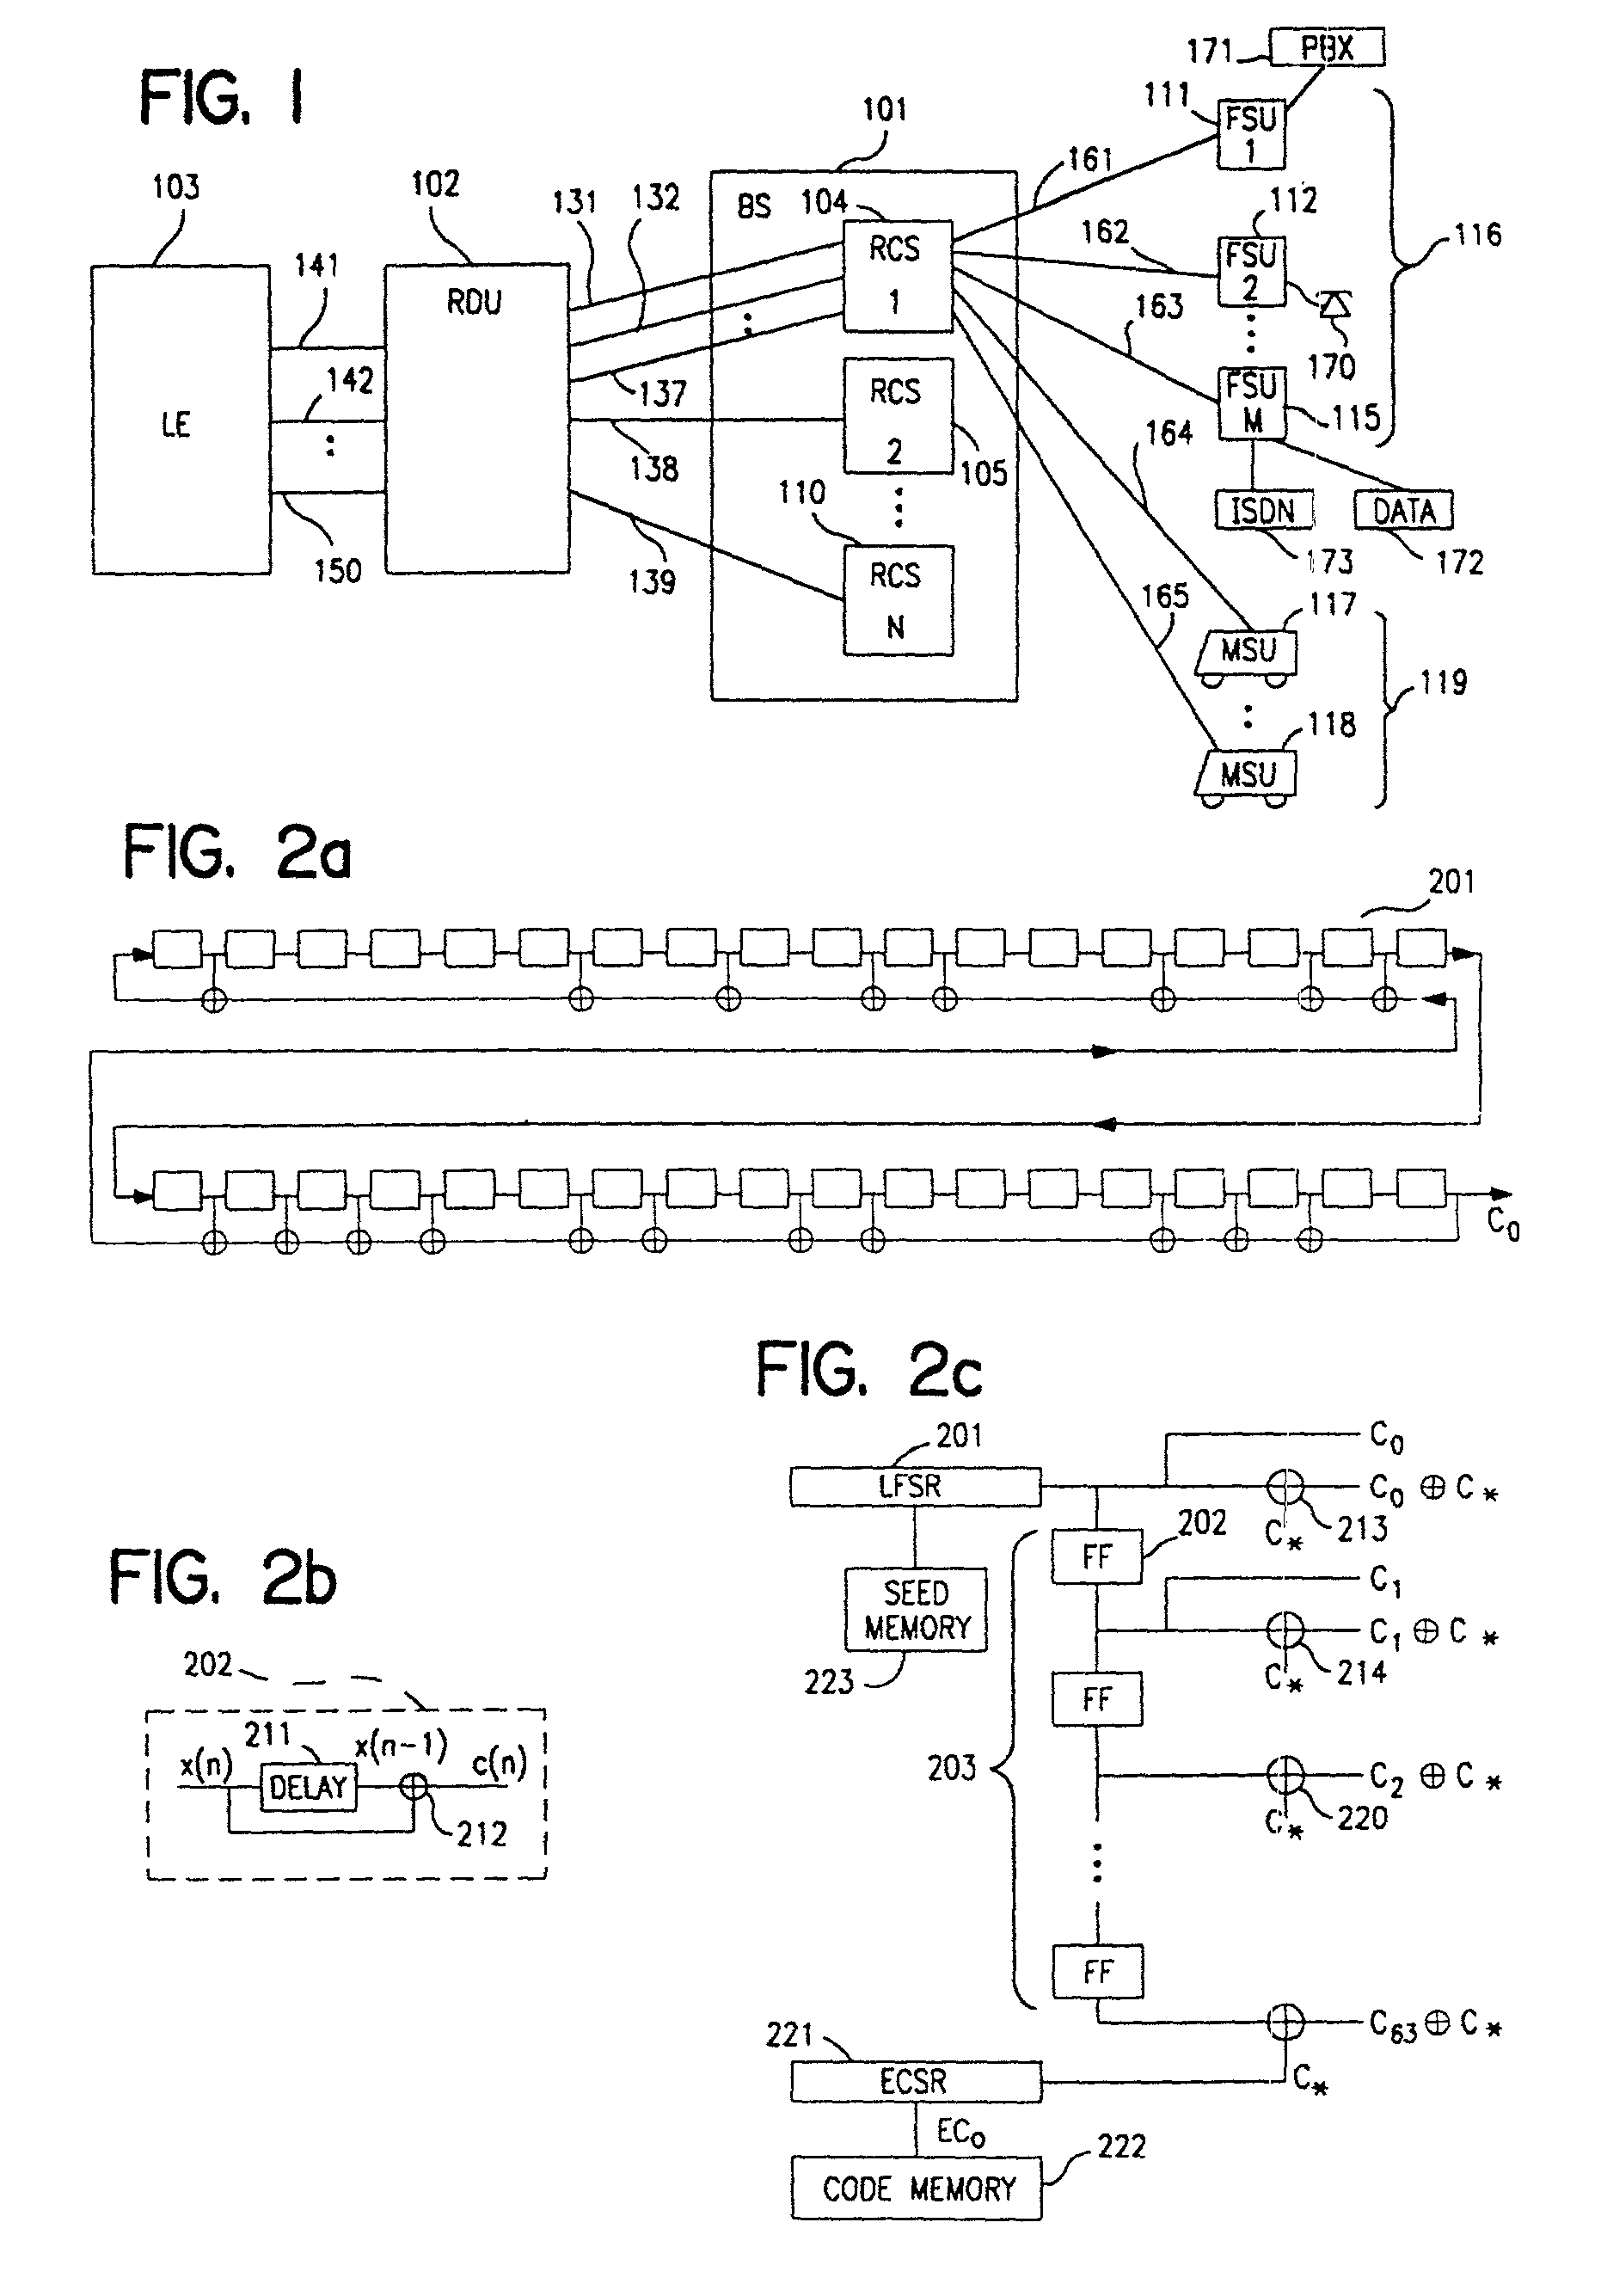 Adaptive forward power control and adaptive reverse power control for spread-spectrum communications